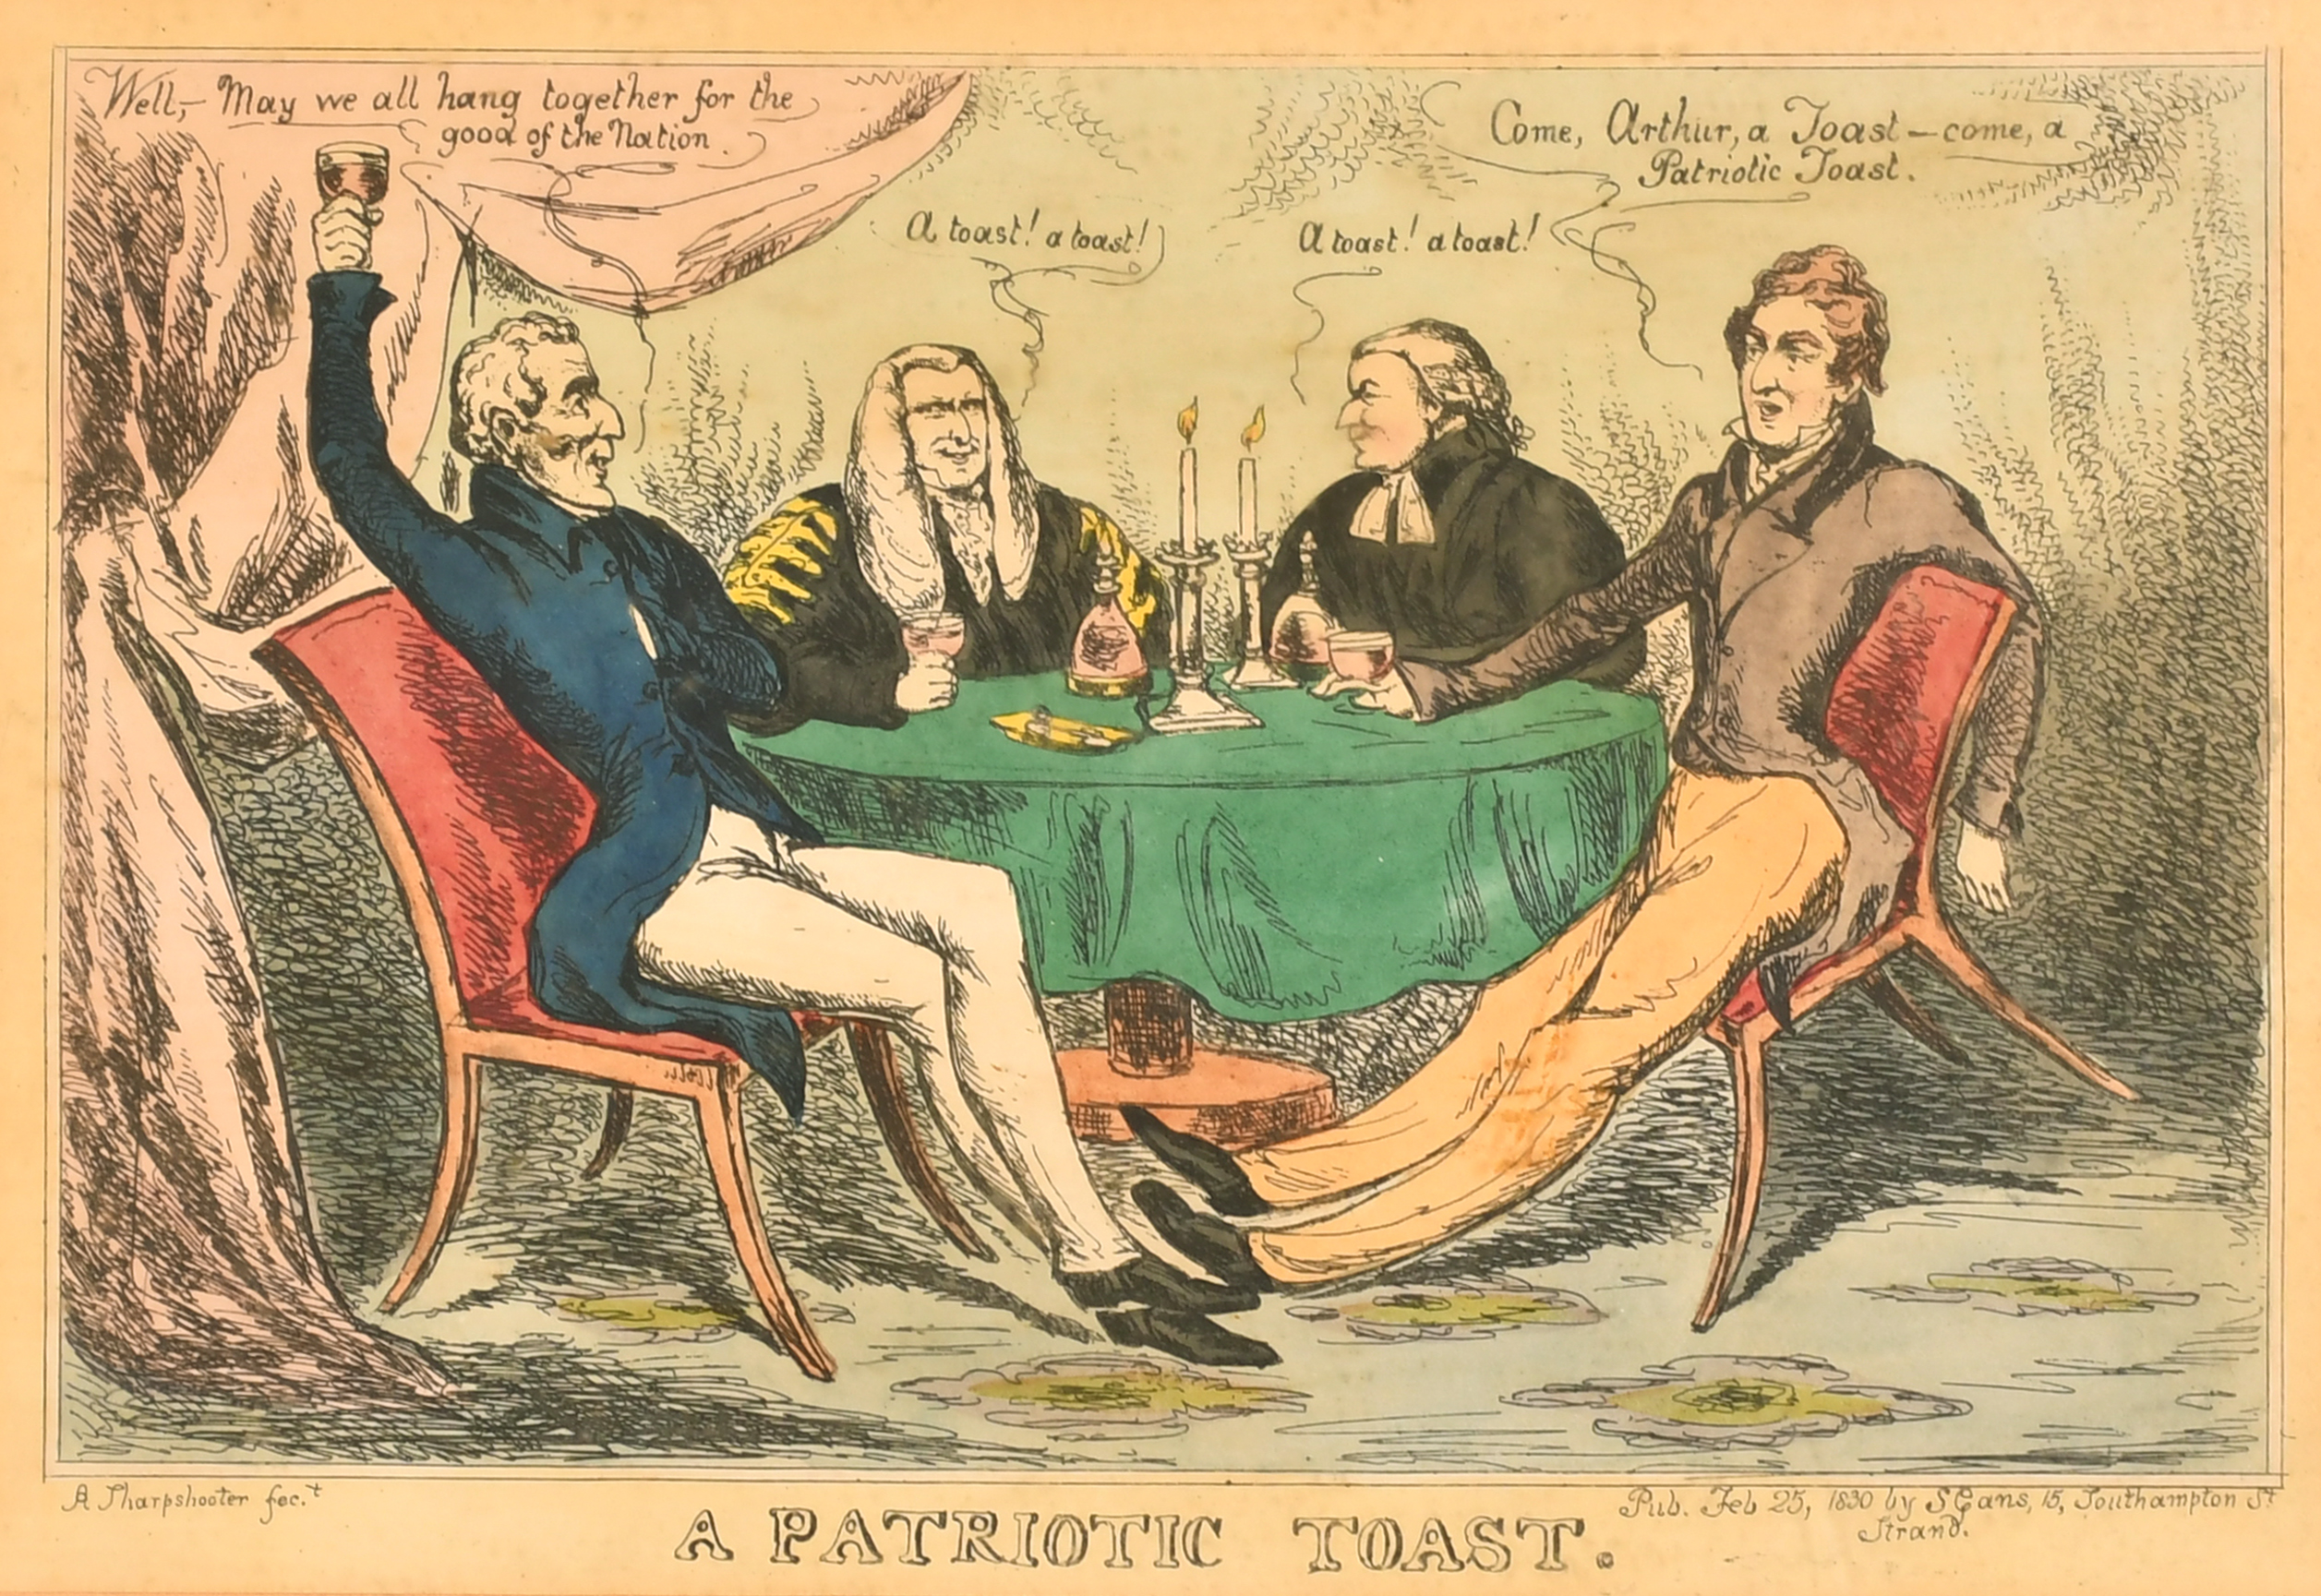 A Sharpshooter (19th Century) British. "A Patriotic Toast", Hand coloured etching, Published by S